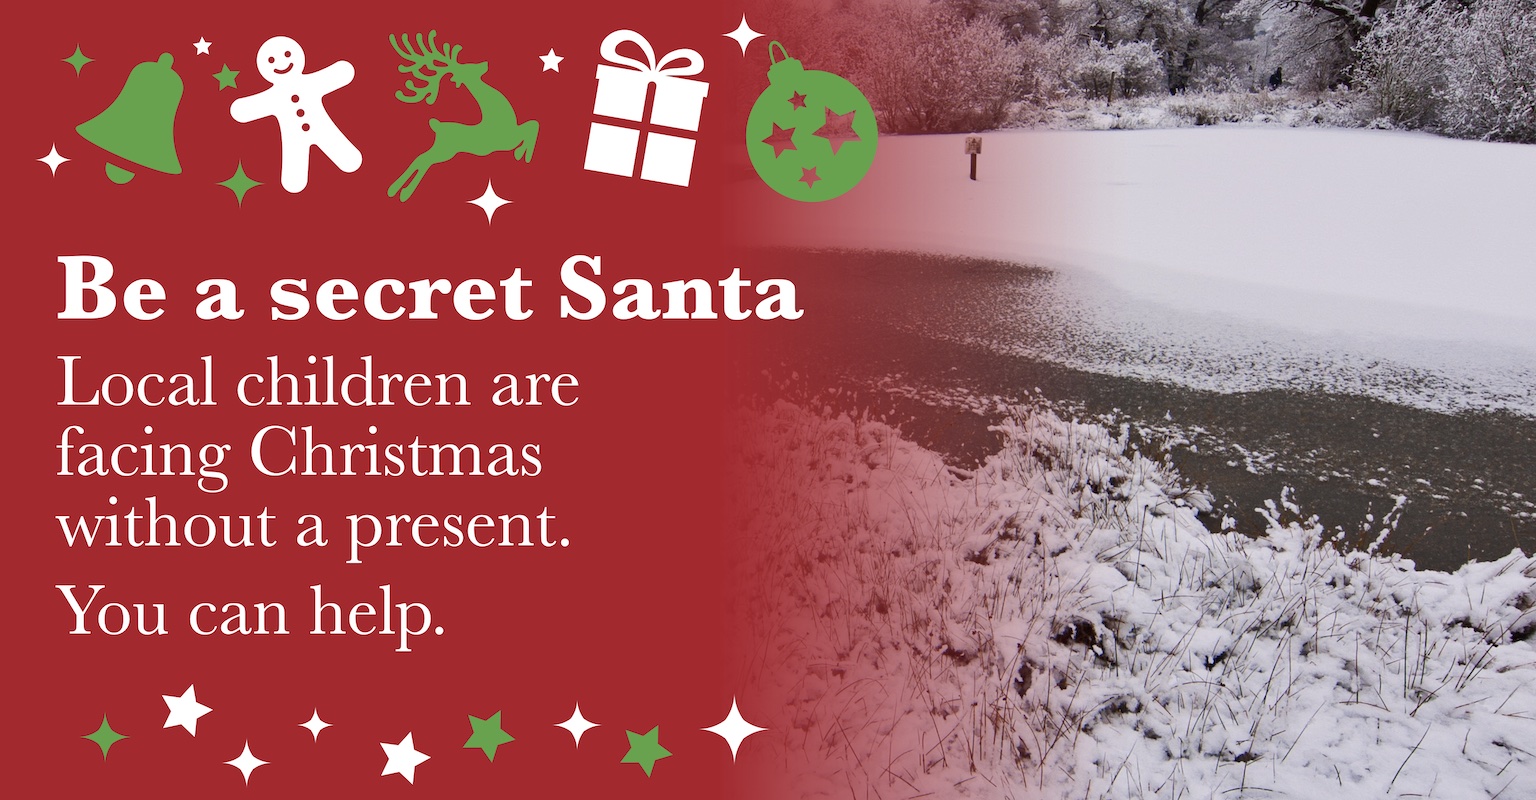 Be a Secret Santa! Local children are facing Christmas without a present. You can help.